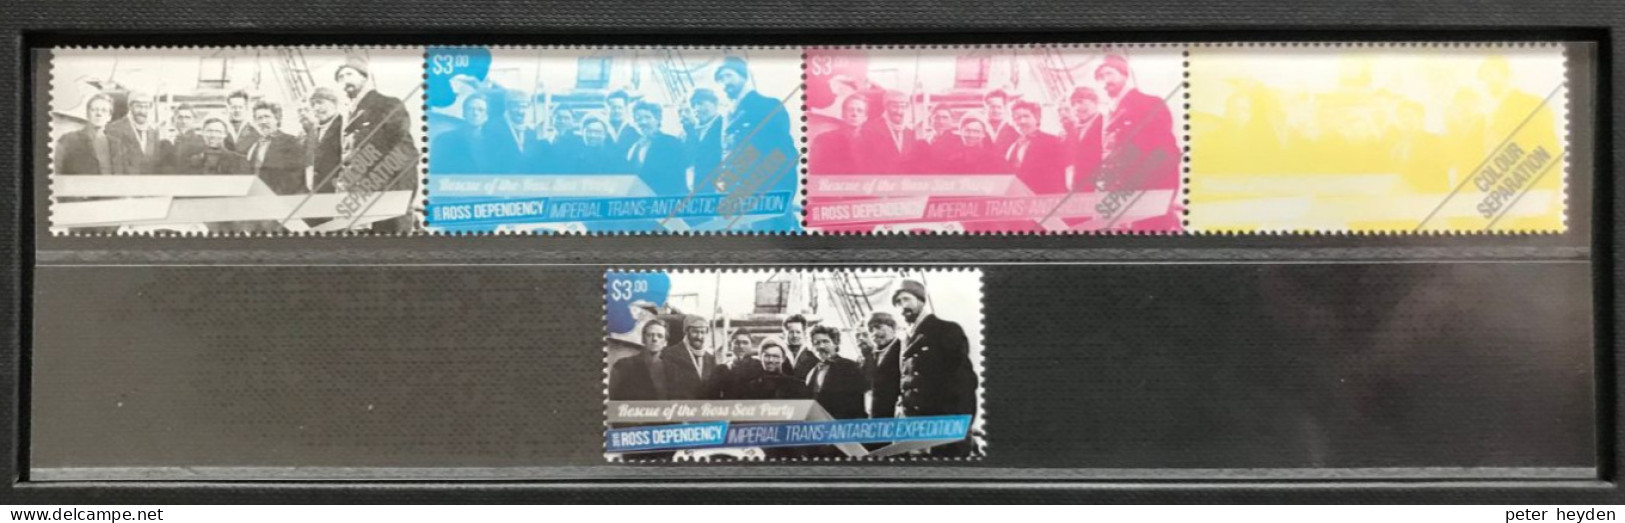 ROSS 2015 ~ DeLuxe Set With MNH ** Special Block, Se-tenant Block Of 6, Color Seperation Strip, FDC Etc. - Neufs